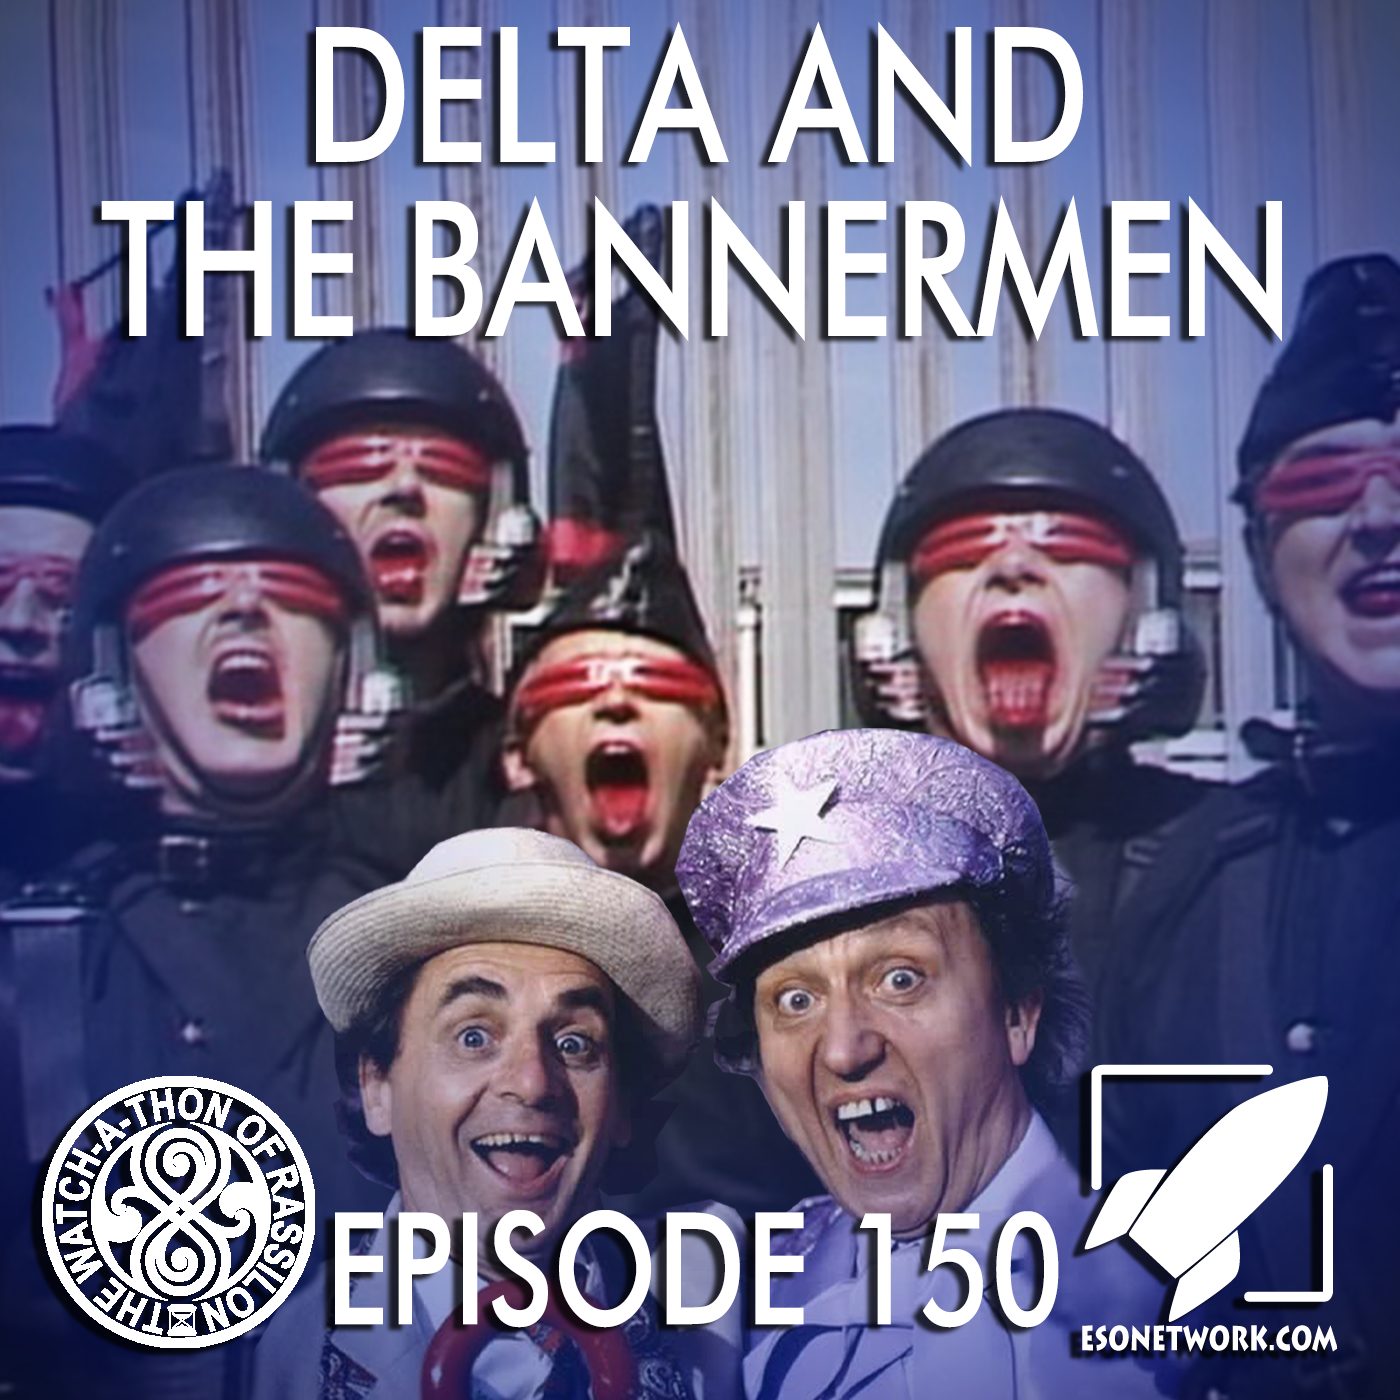 The Watch-A-Thon of Rassilon: Episode 150: Delta and the Bannermen